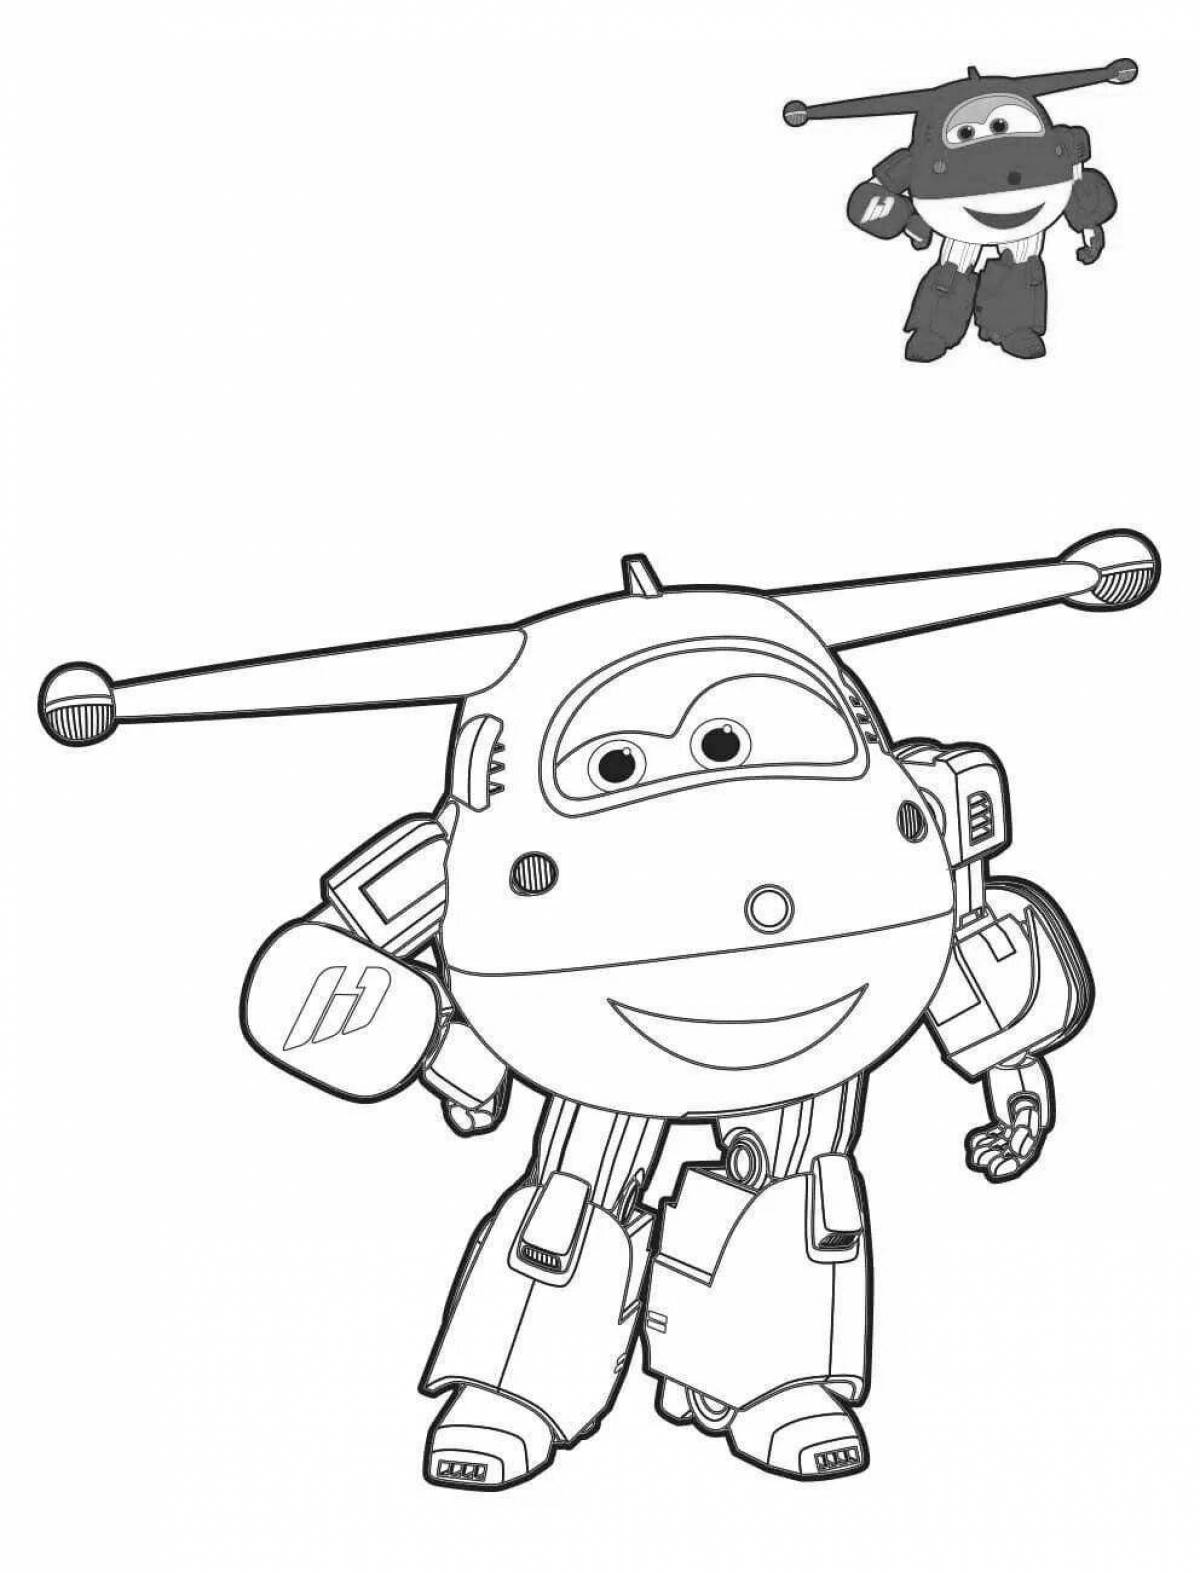 Crystal super wings coloring page